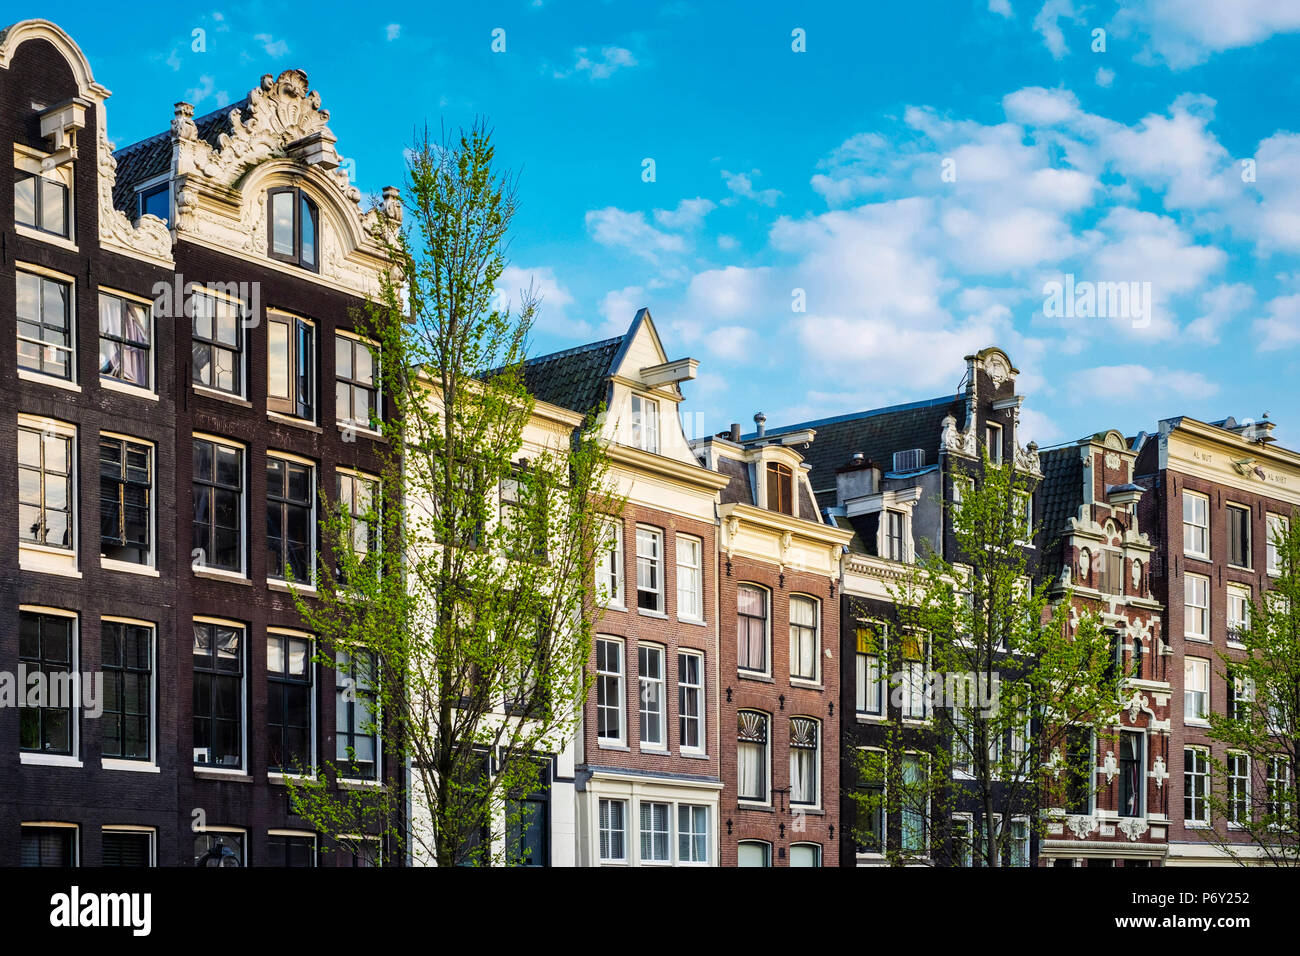 Netherlands, North Holland, Amsterdam. Facades of canal houses on Oudezijds Voorburgwal canal. Stock Photo